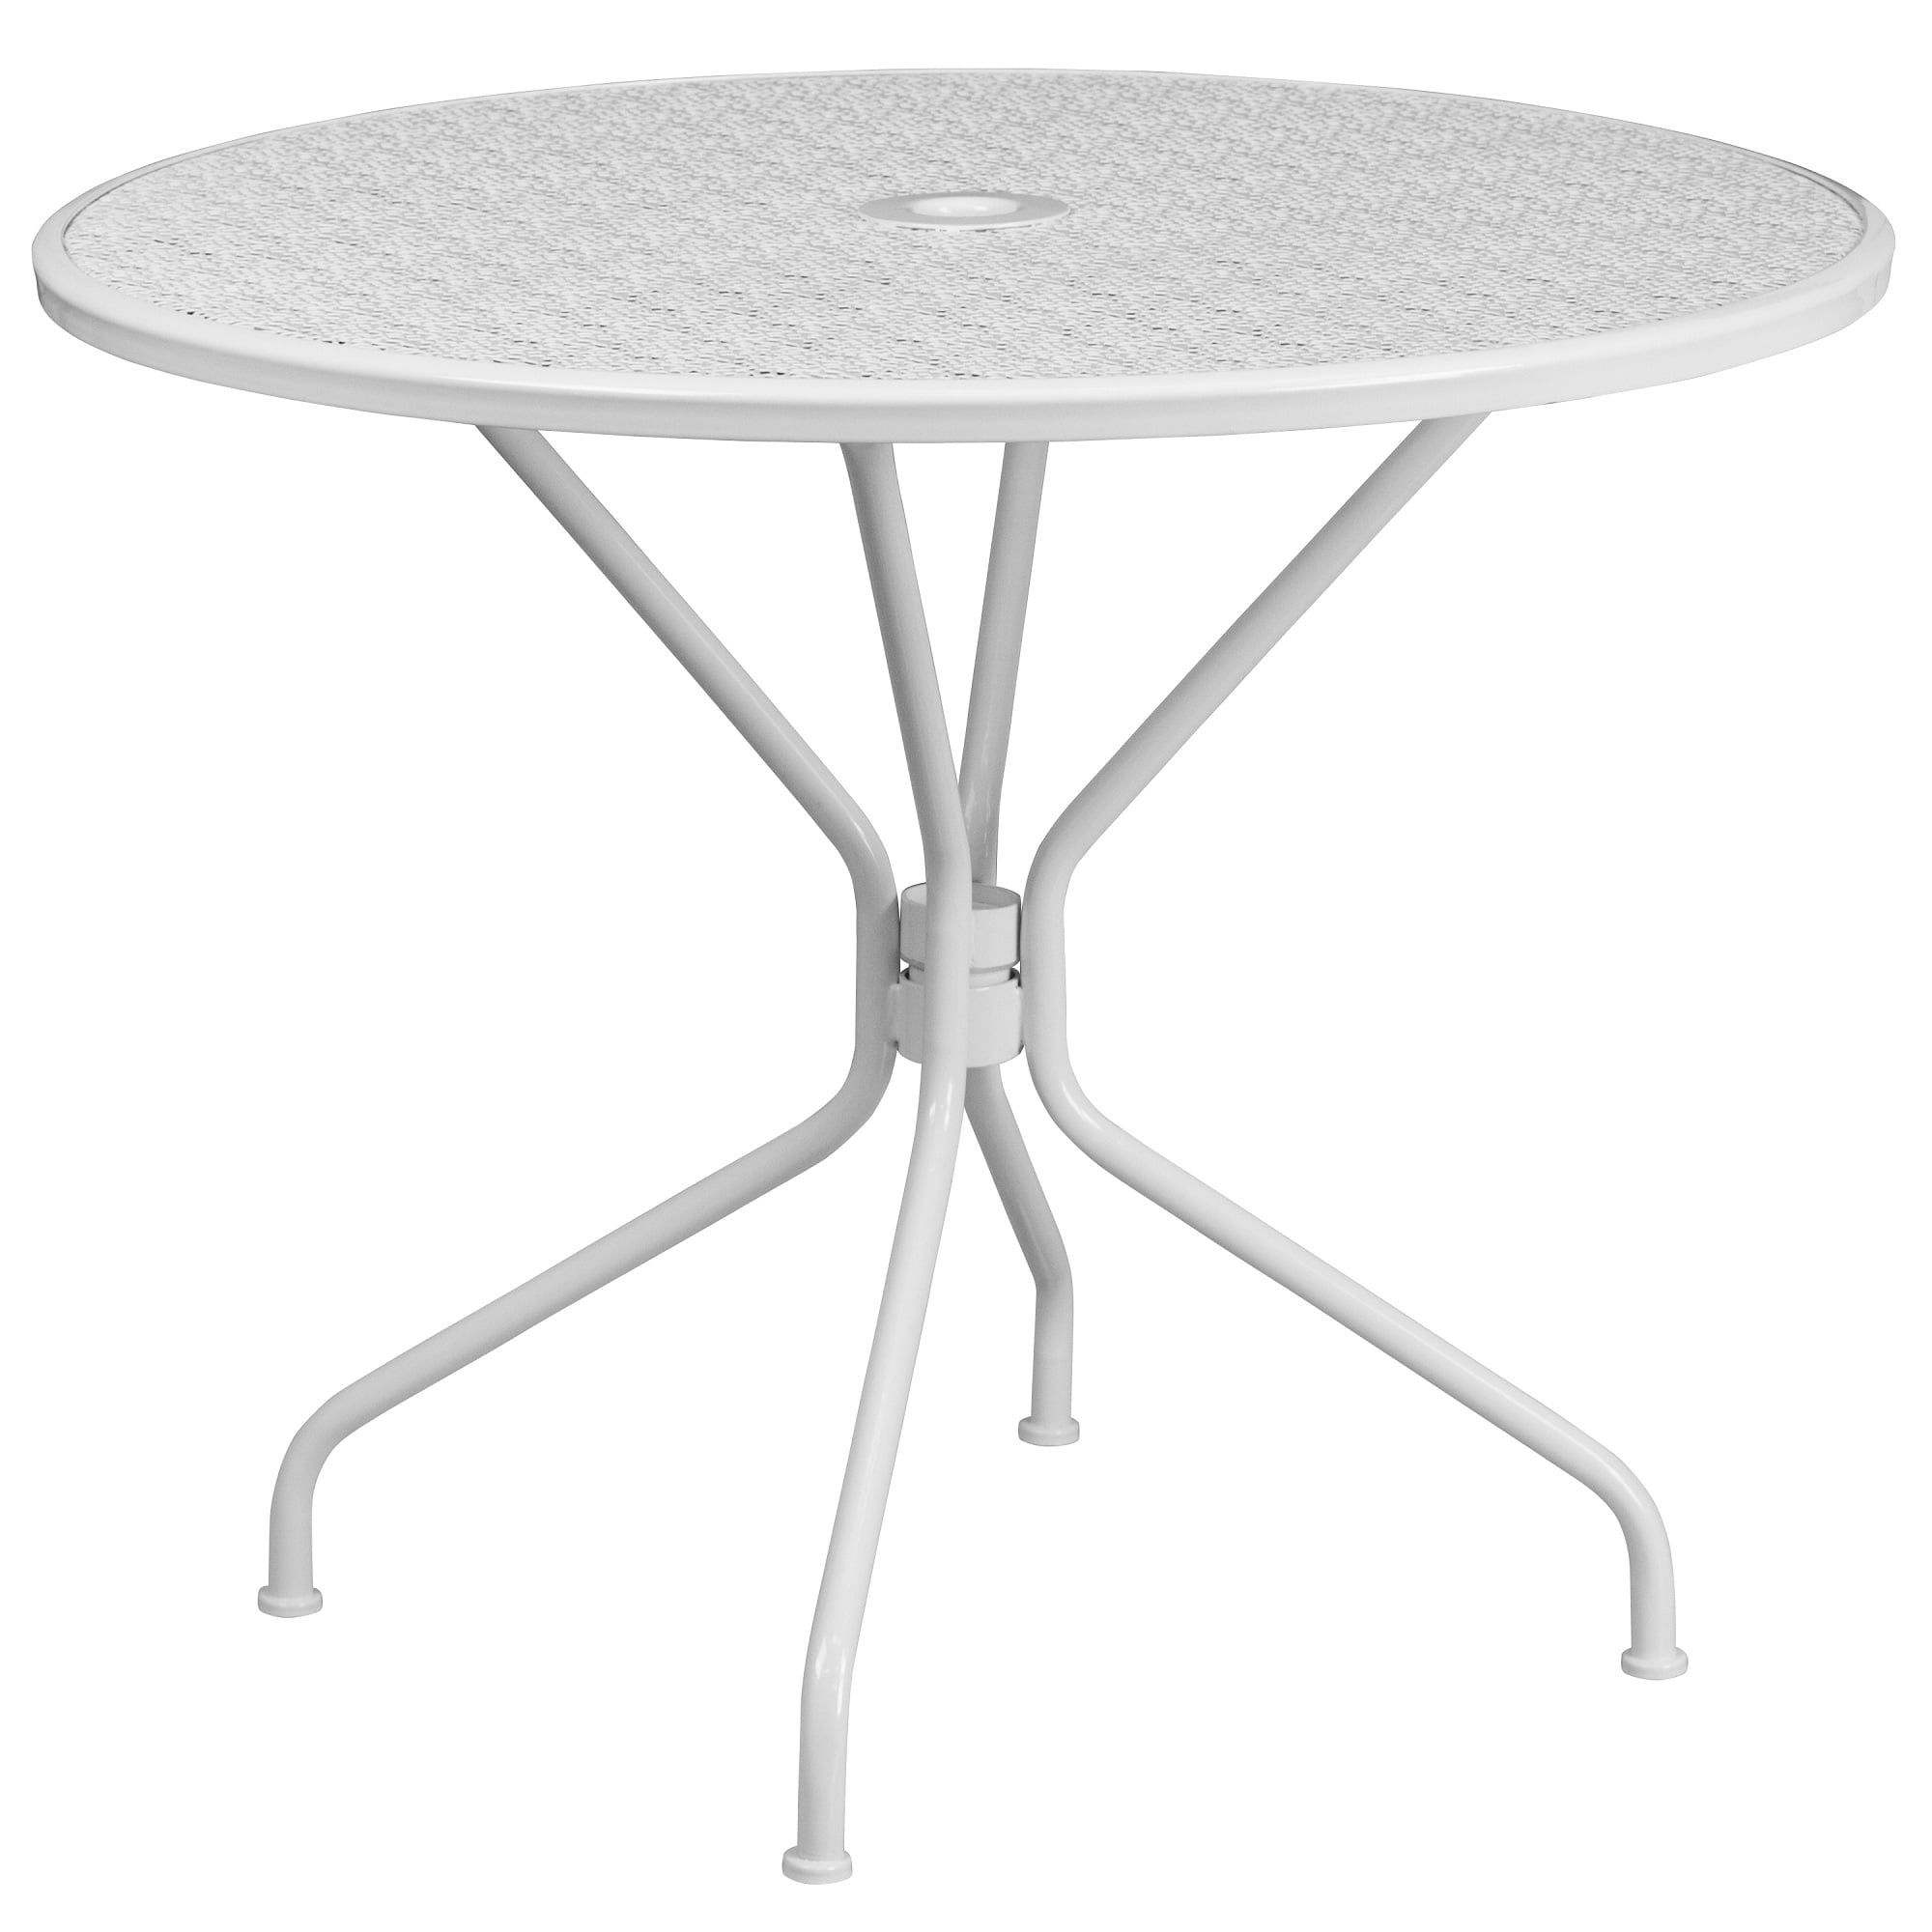 35 25 White Contemporary Round Outdoor, Round Outdoor Dining Table 23 58 In W X L With Umbrella Hole